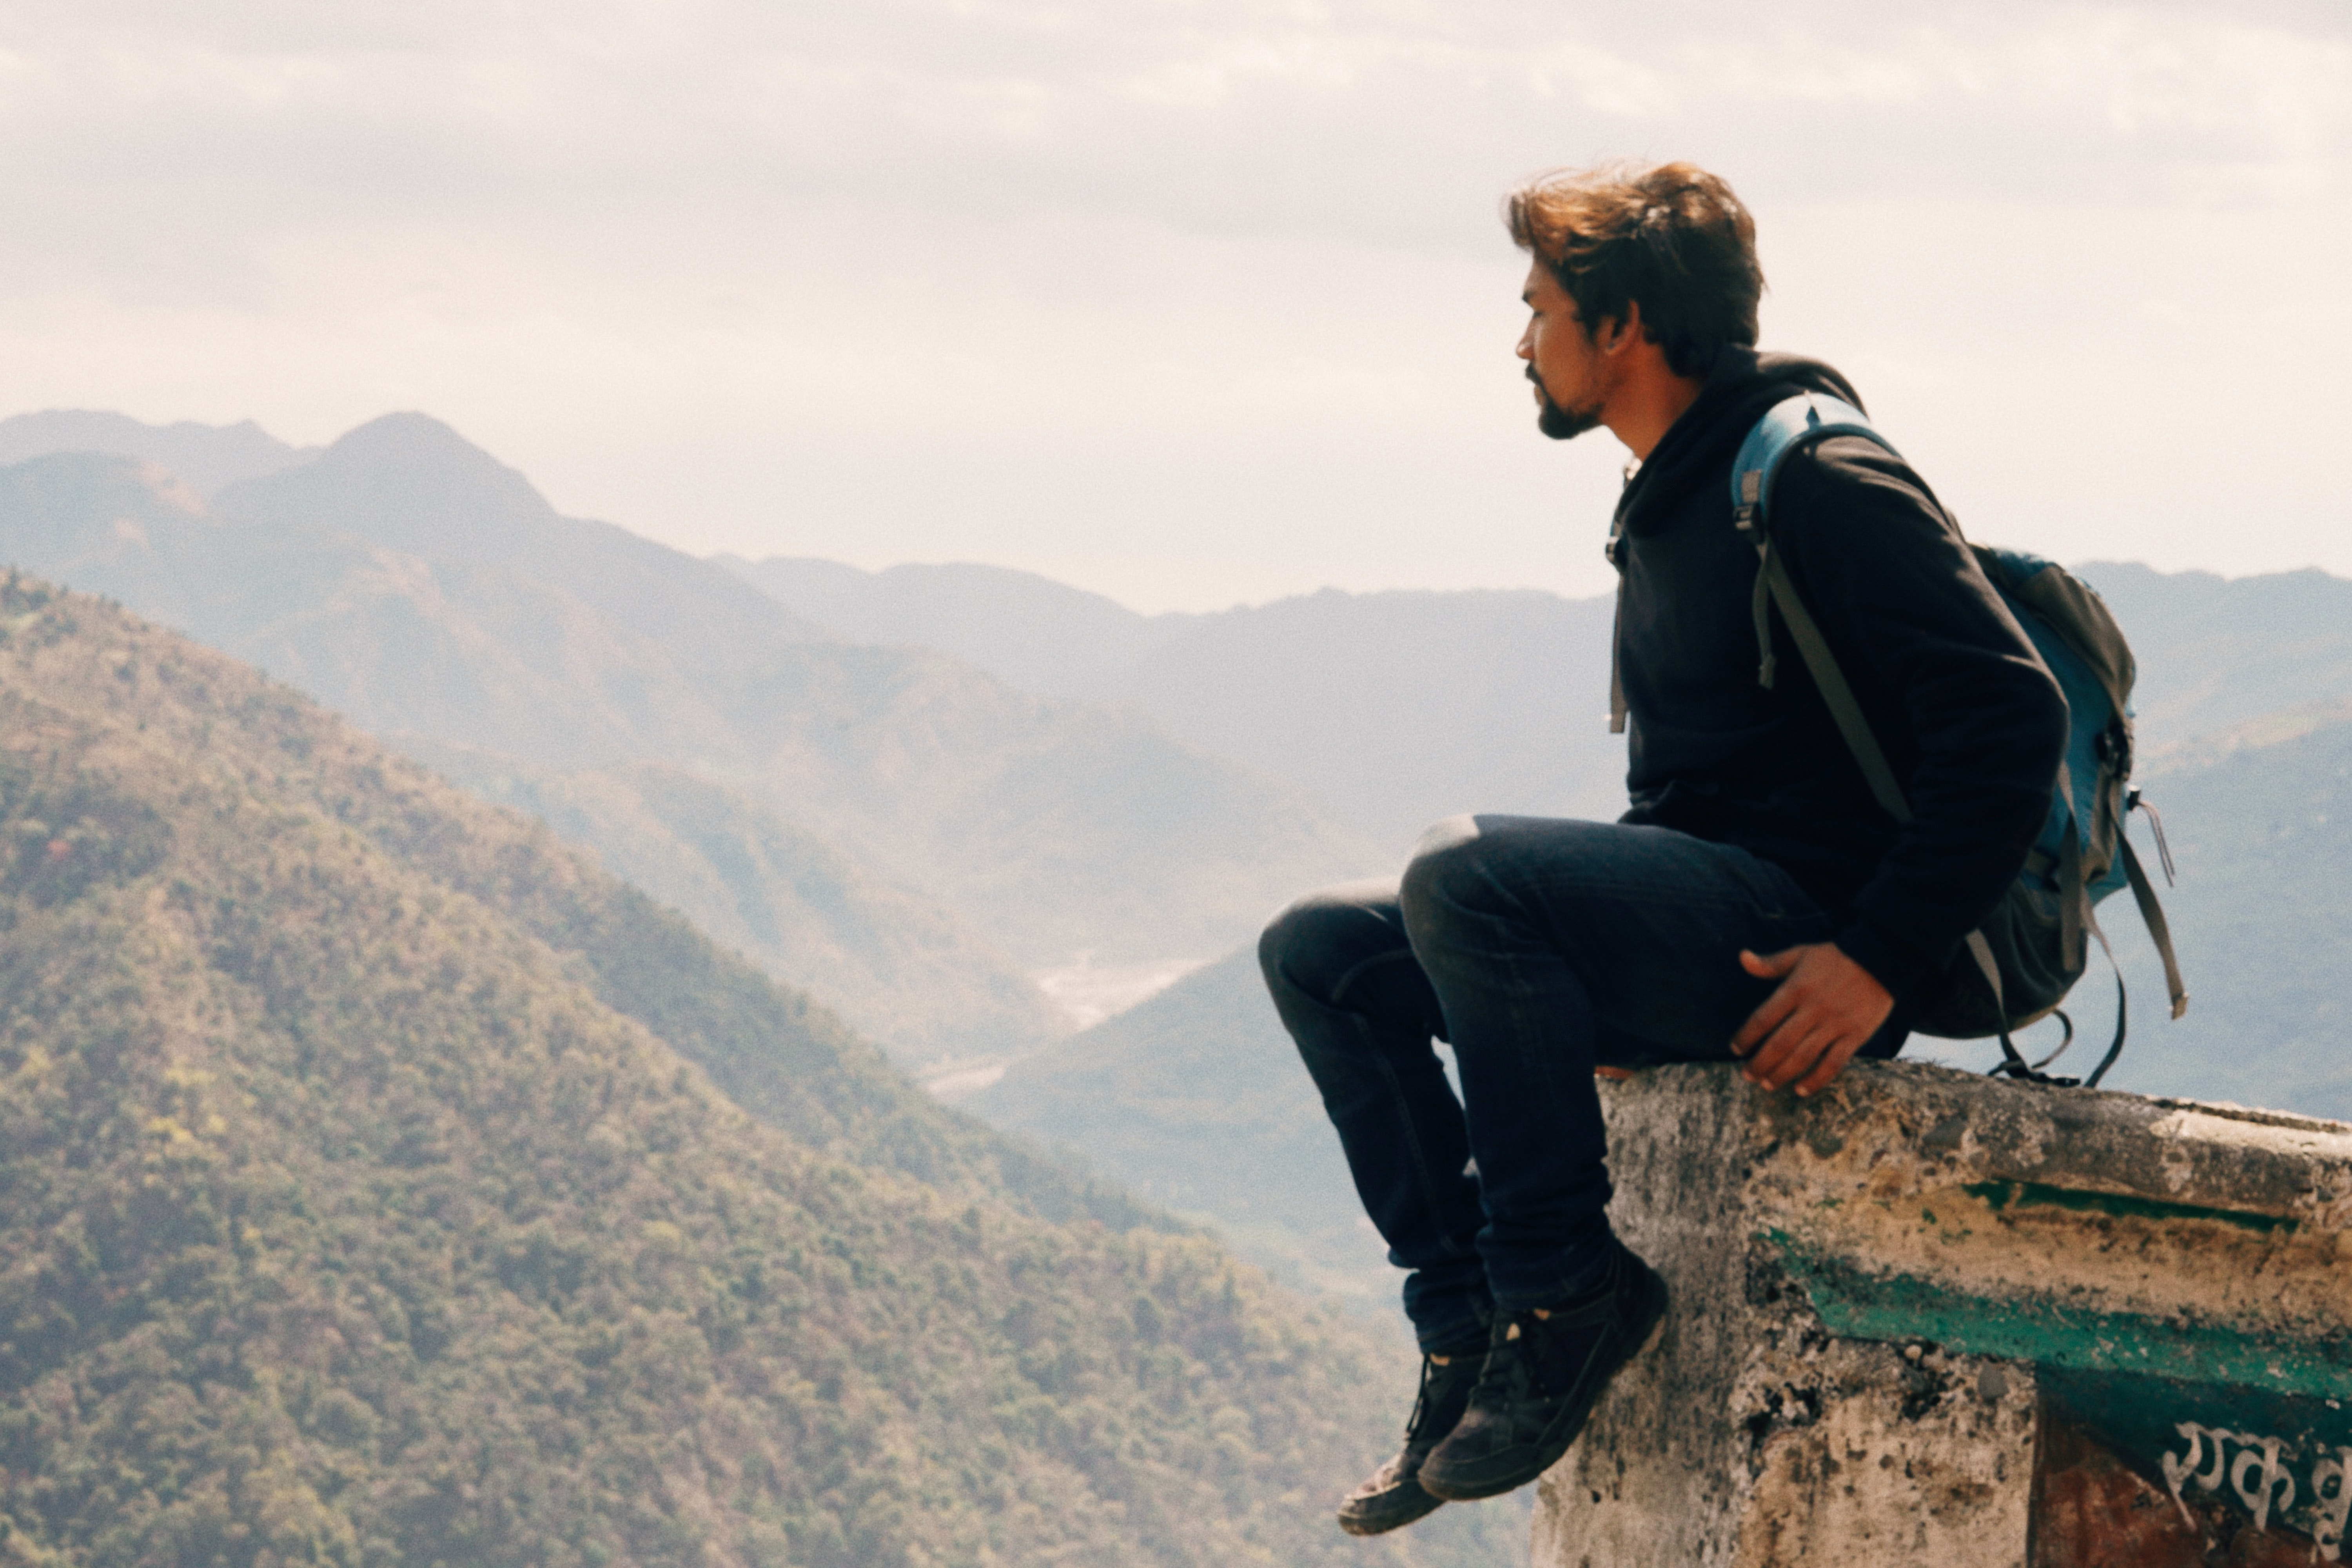 A man sits on the edge of a small cliff overlooking large mountains. His face is turned.